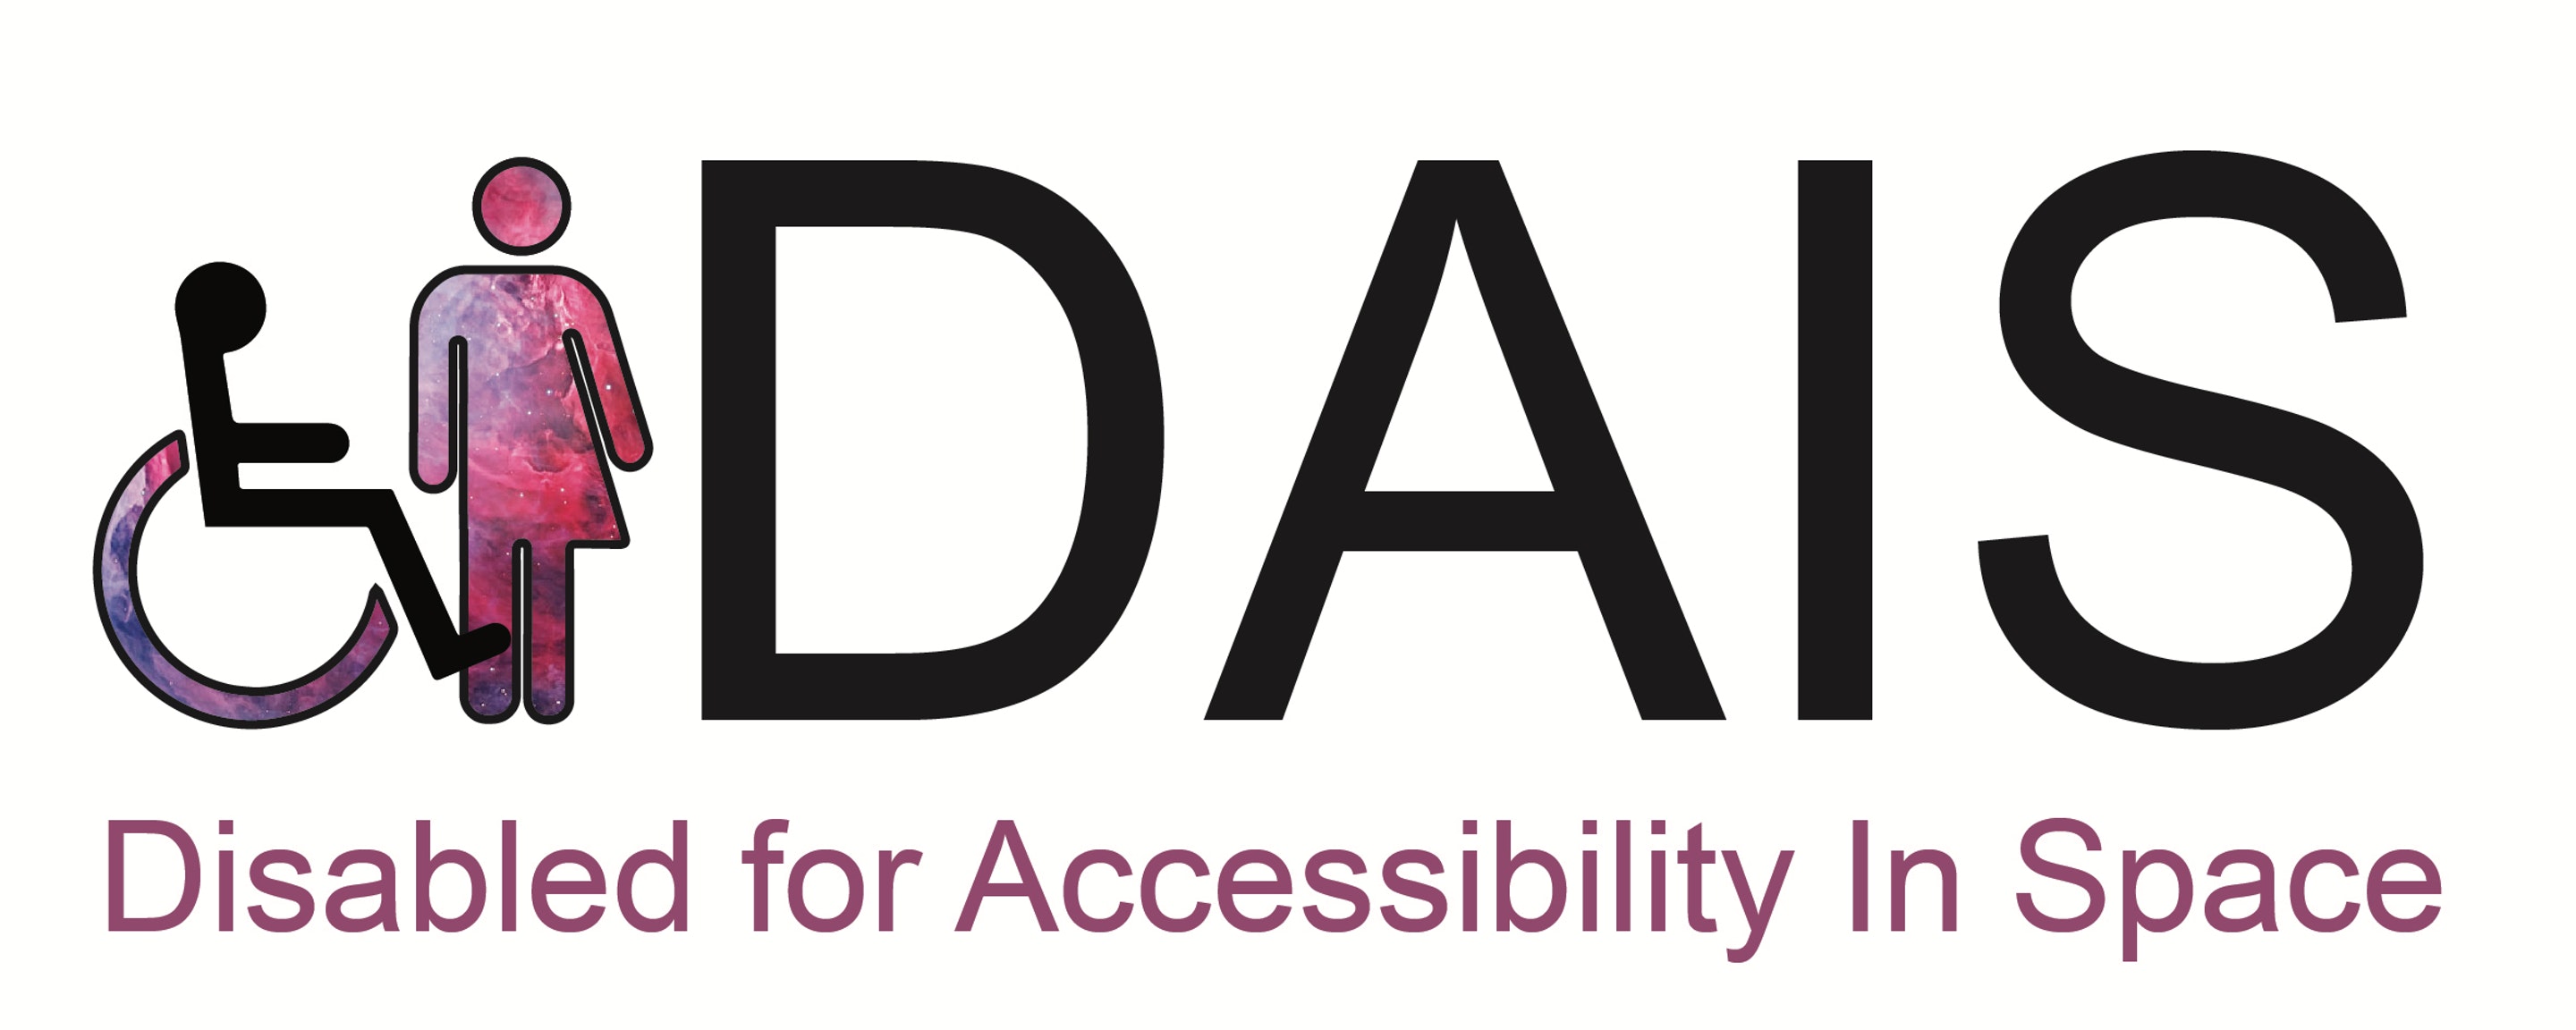 DAIS (Disabled for Accessibility In Space)